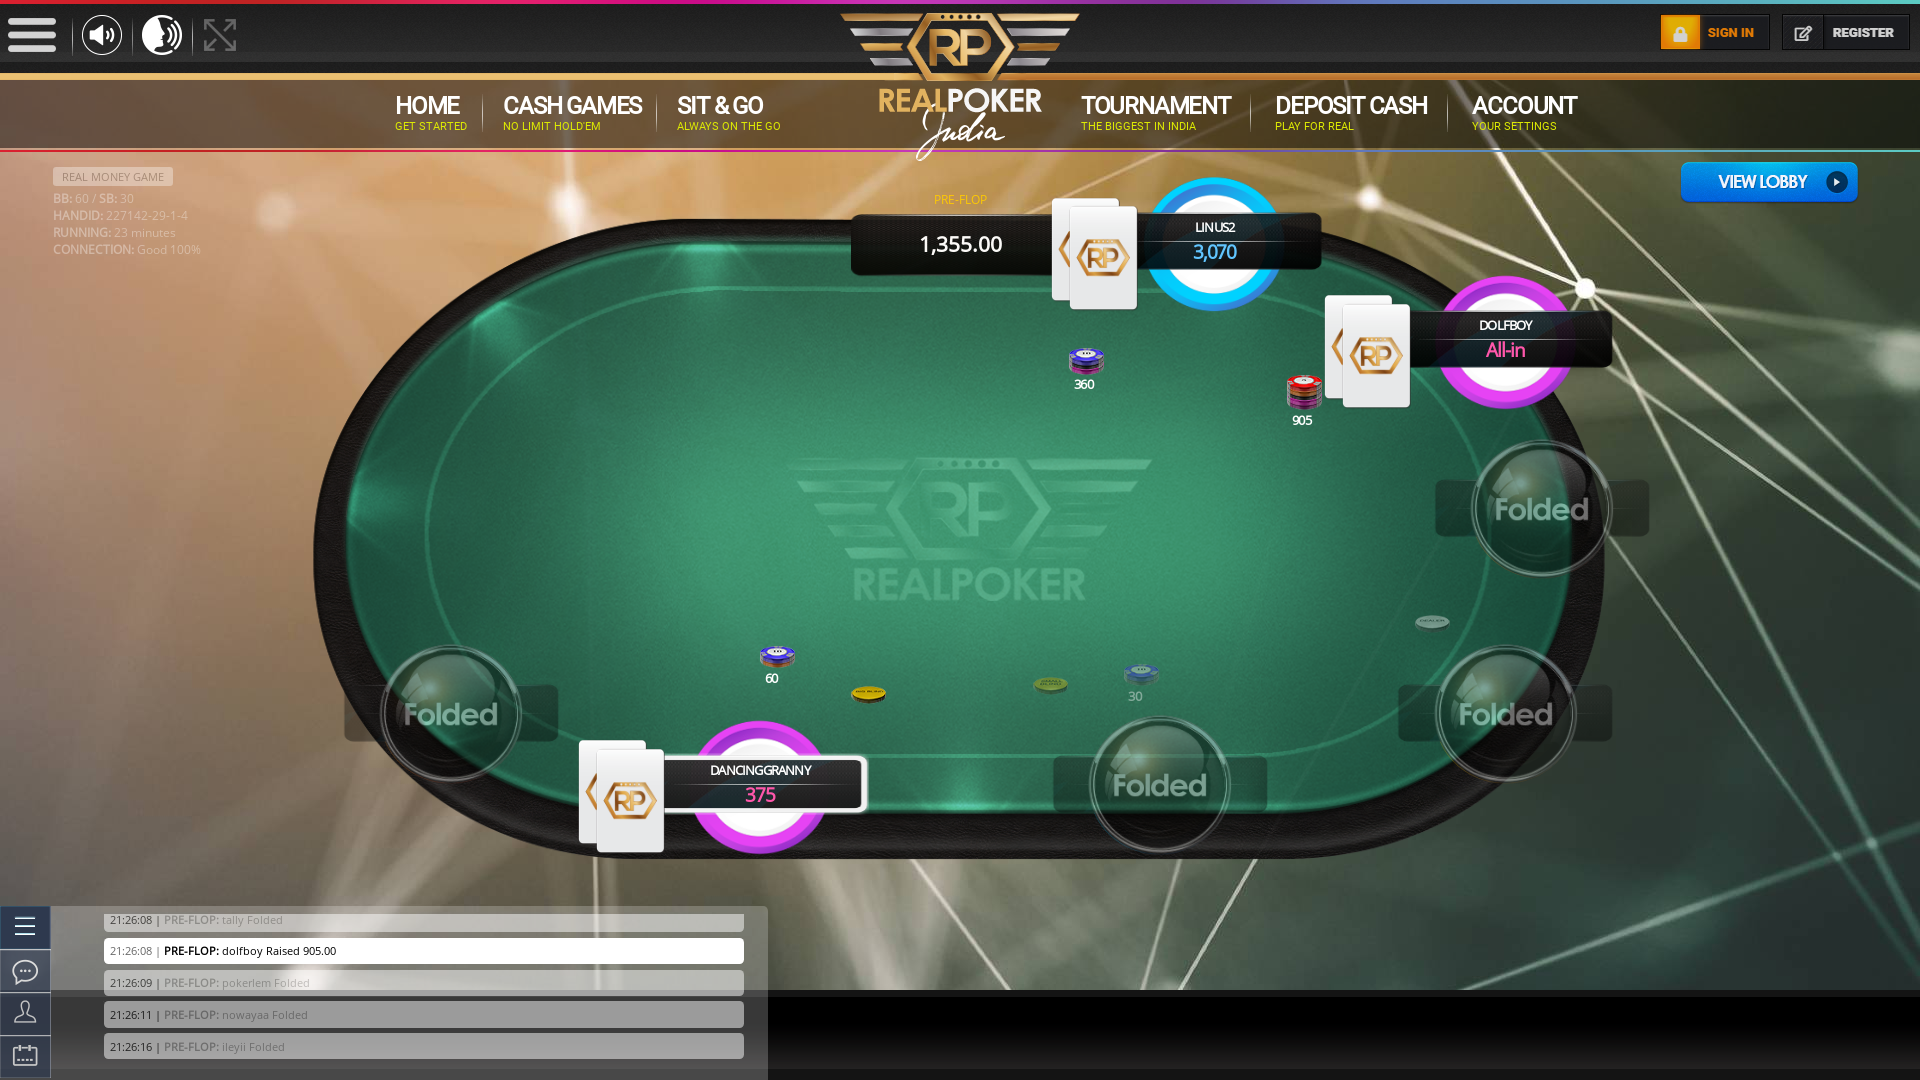 Indian poker on a 10 player table in the 22nd minute